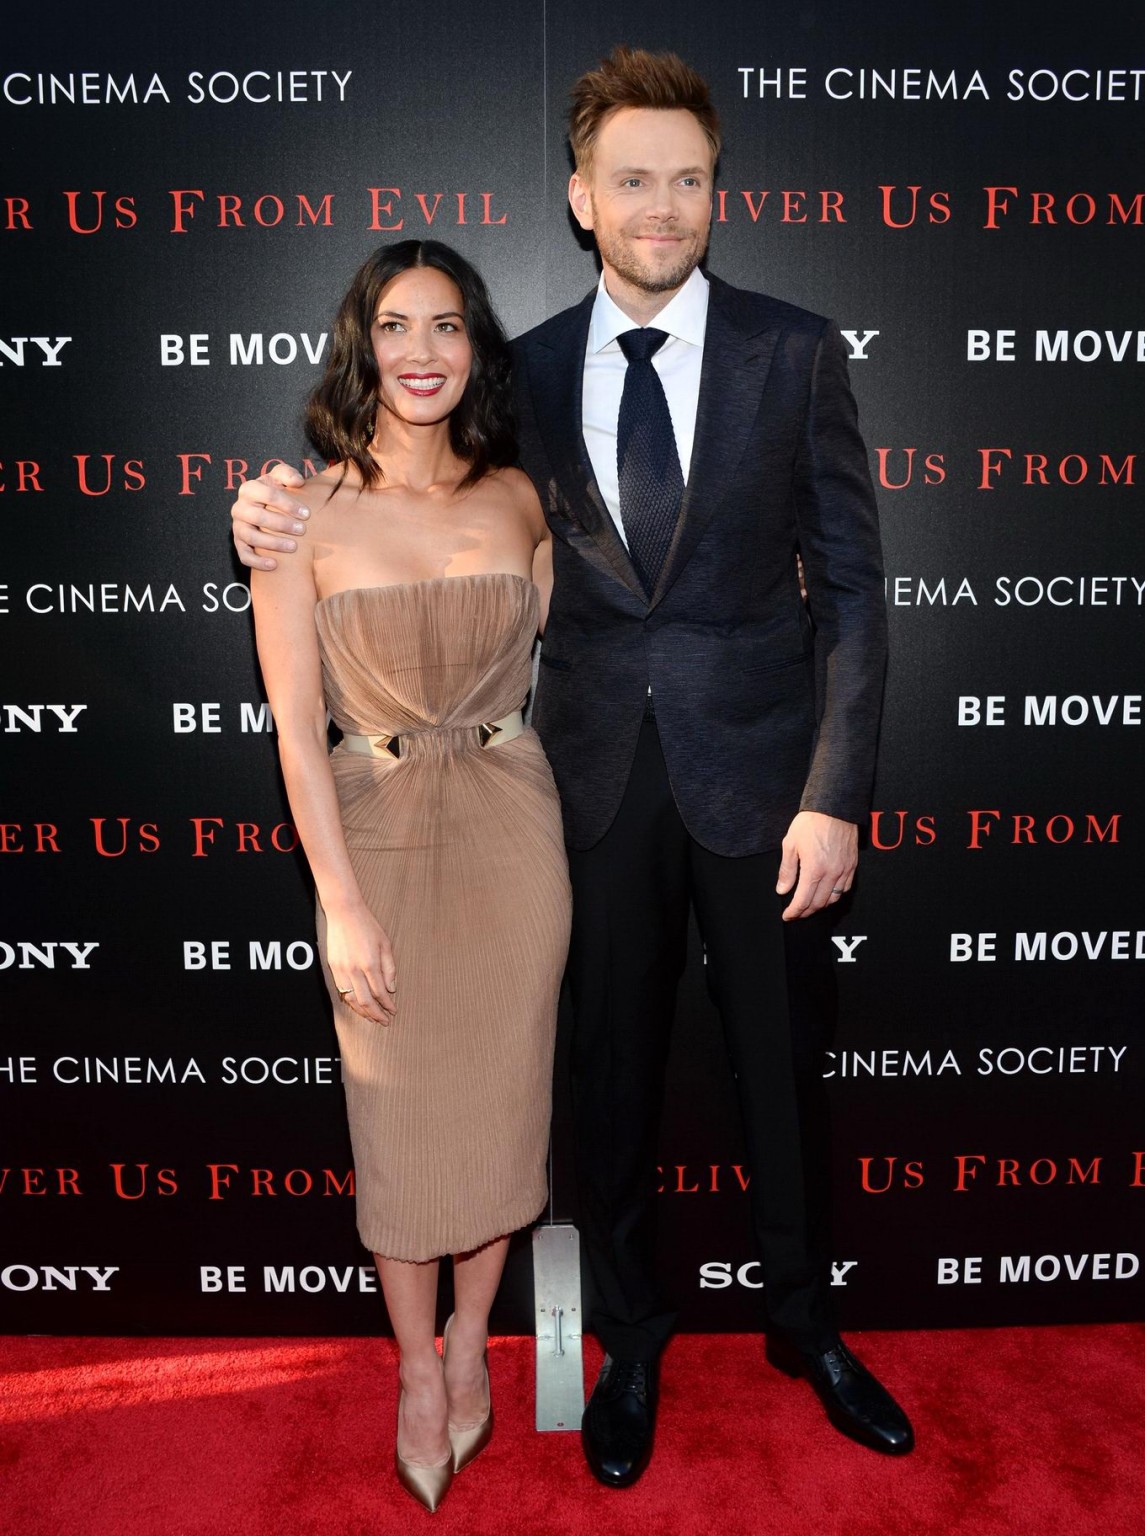 Olivia Munn busty wearing a strapless dress at Deliver Us From Evil screening in #75192941